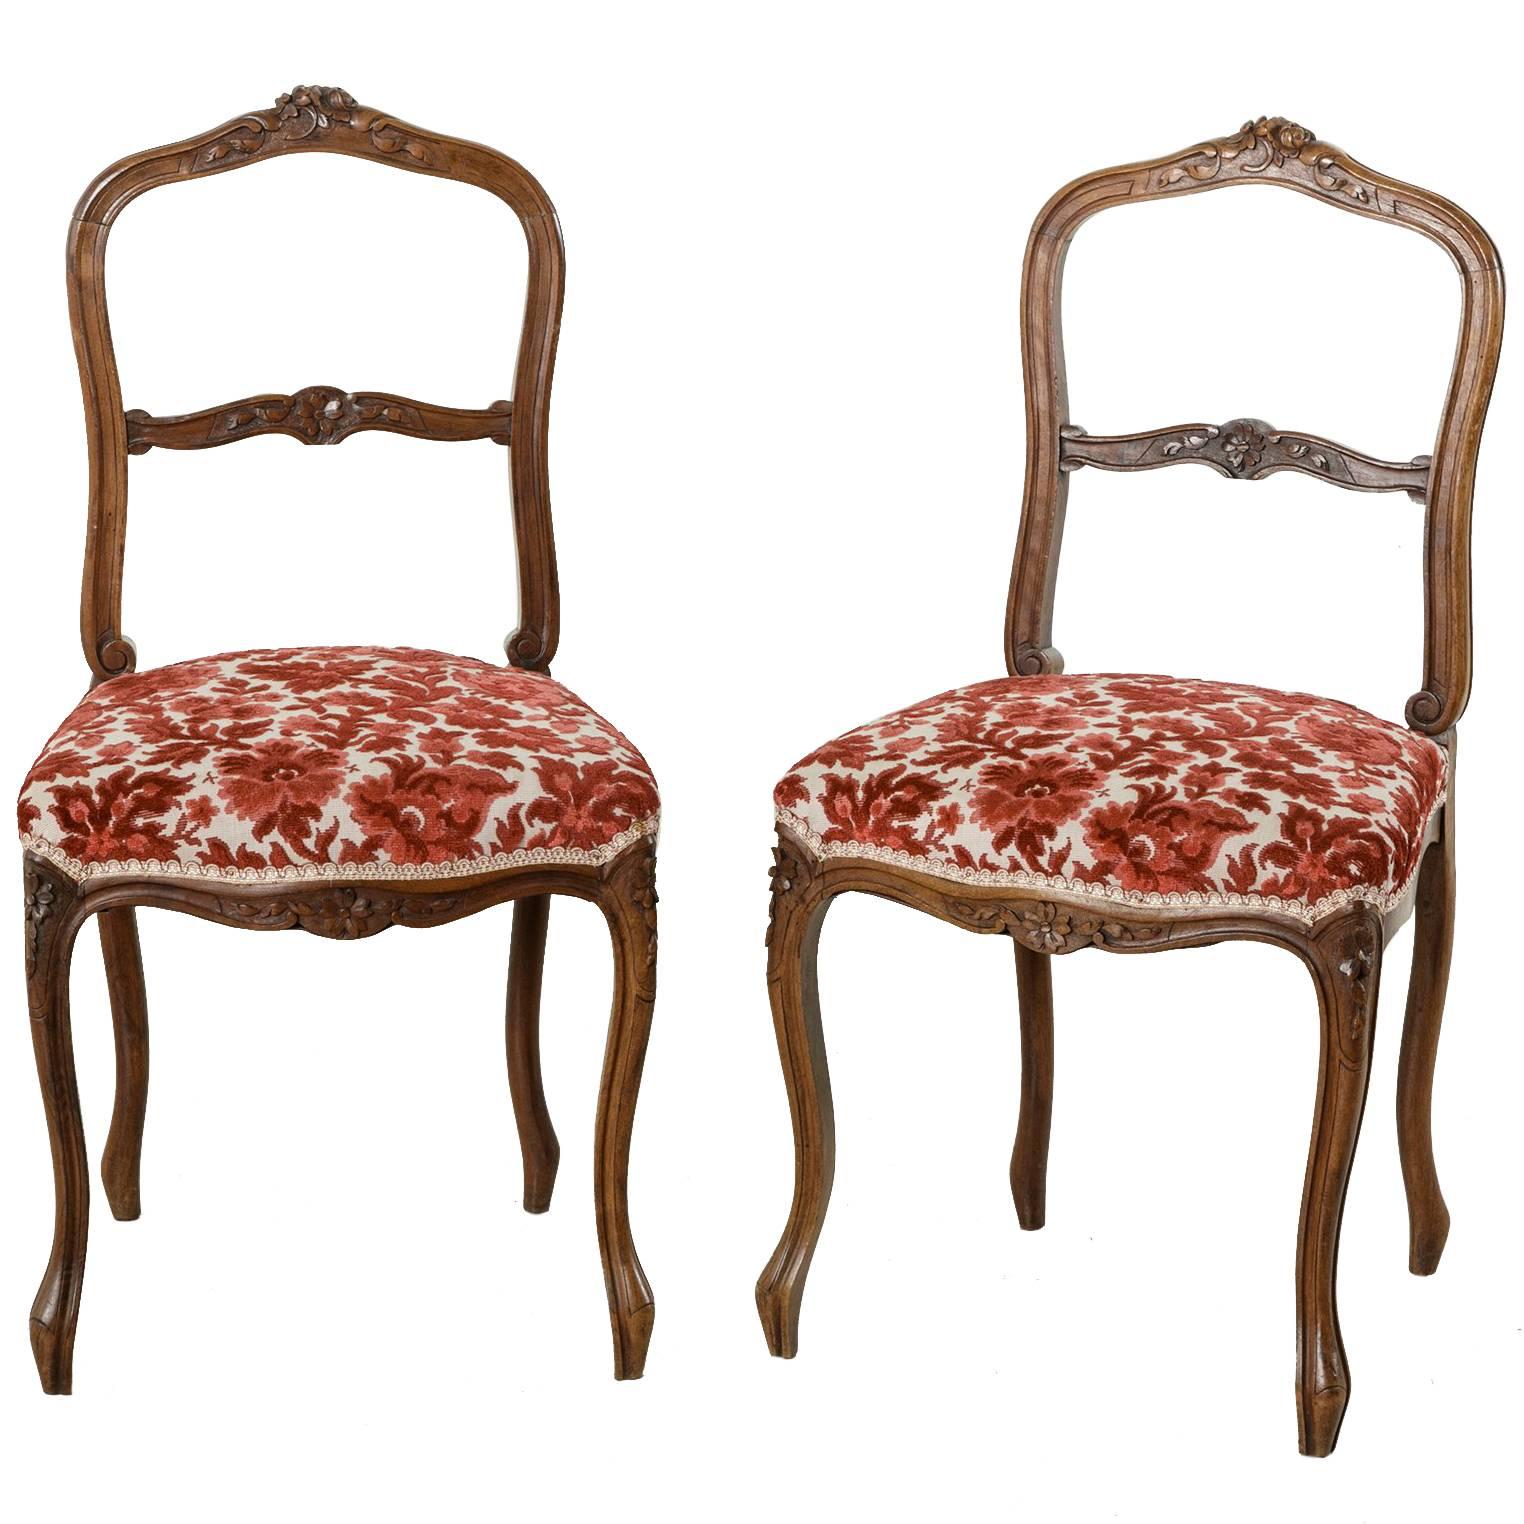 Pair of Hand-Carved Walnut Louis XV Style Opera Chairs, Side Chairs, circa 1890